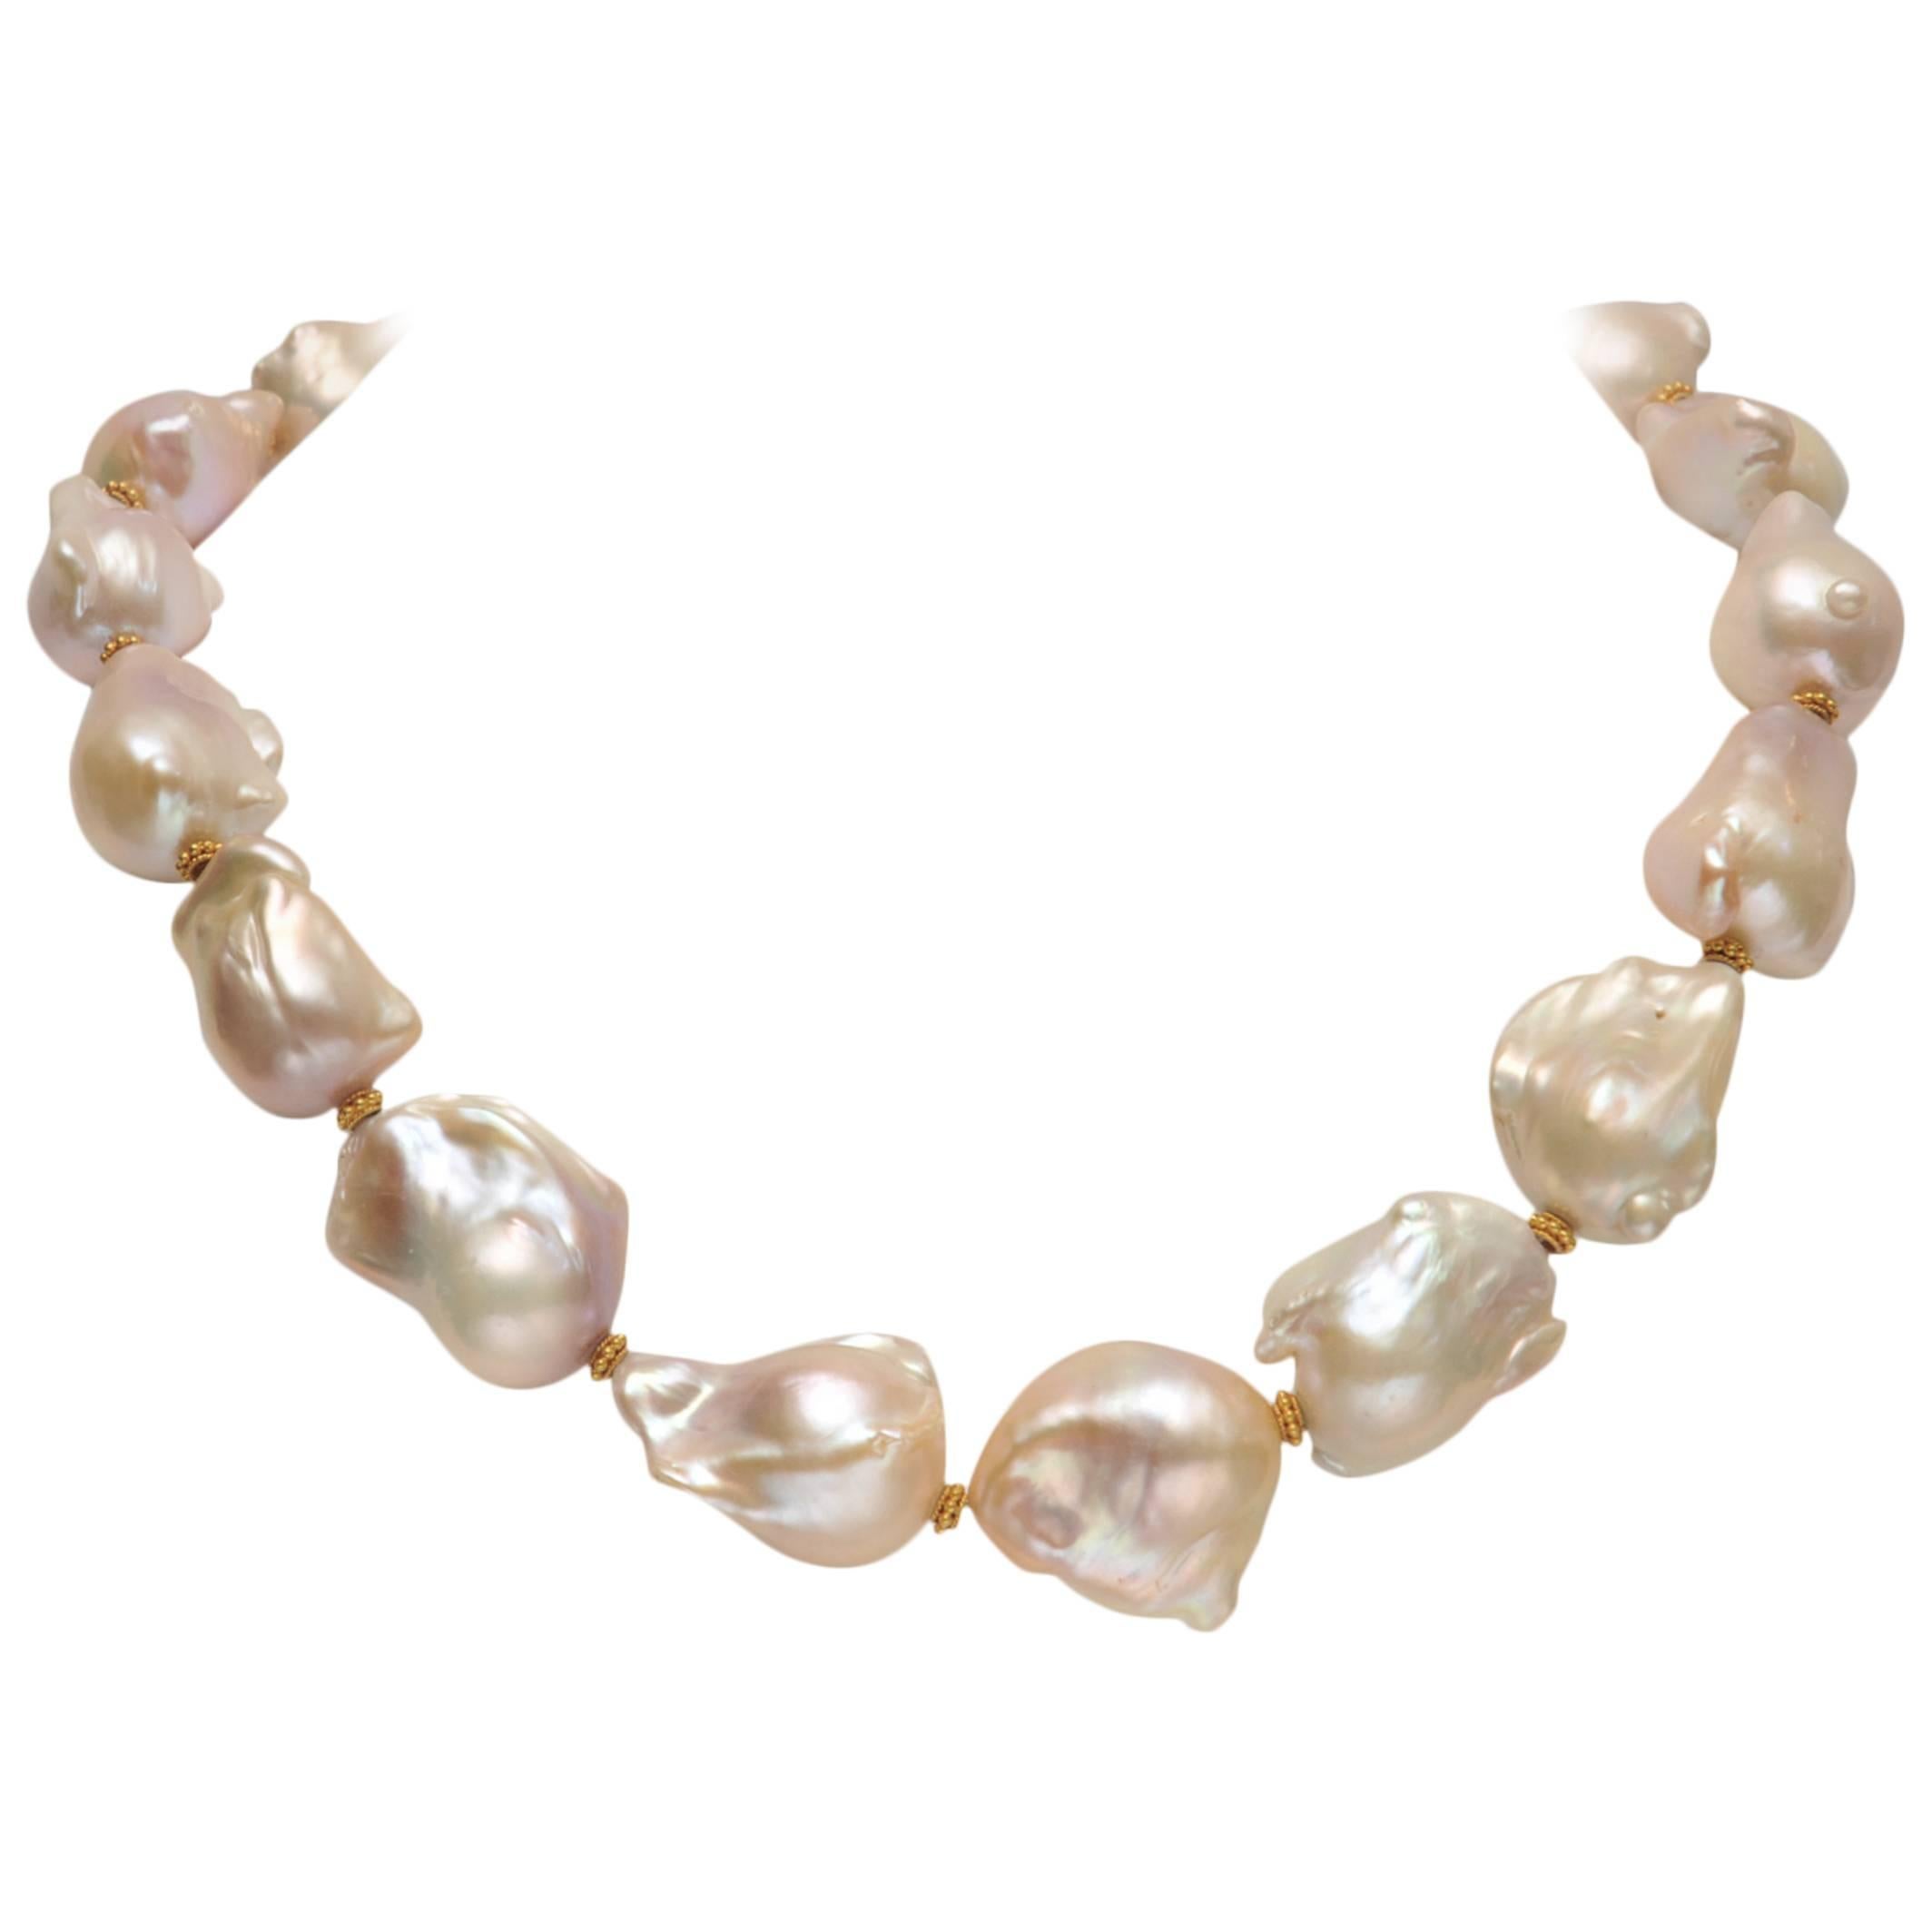 Blush Pink Baroque Pearl and 22K Gold Beaded Necklace